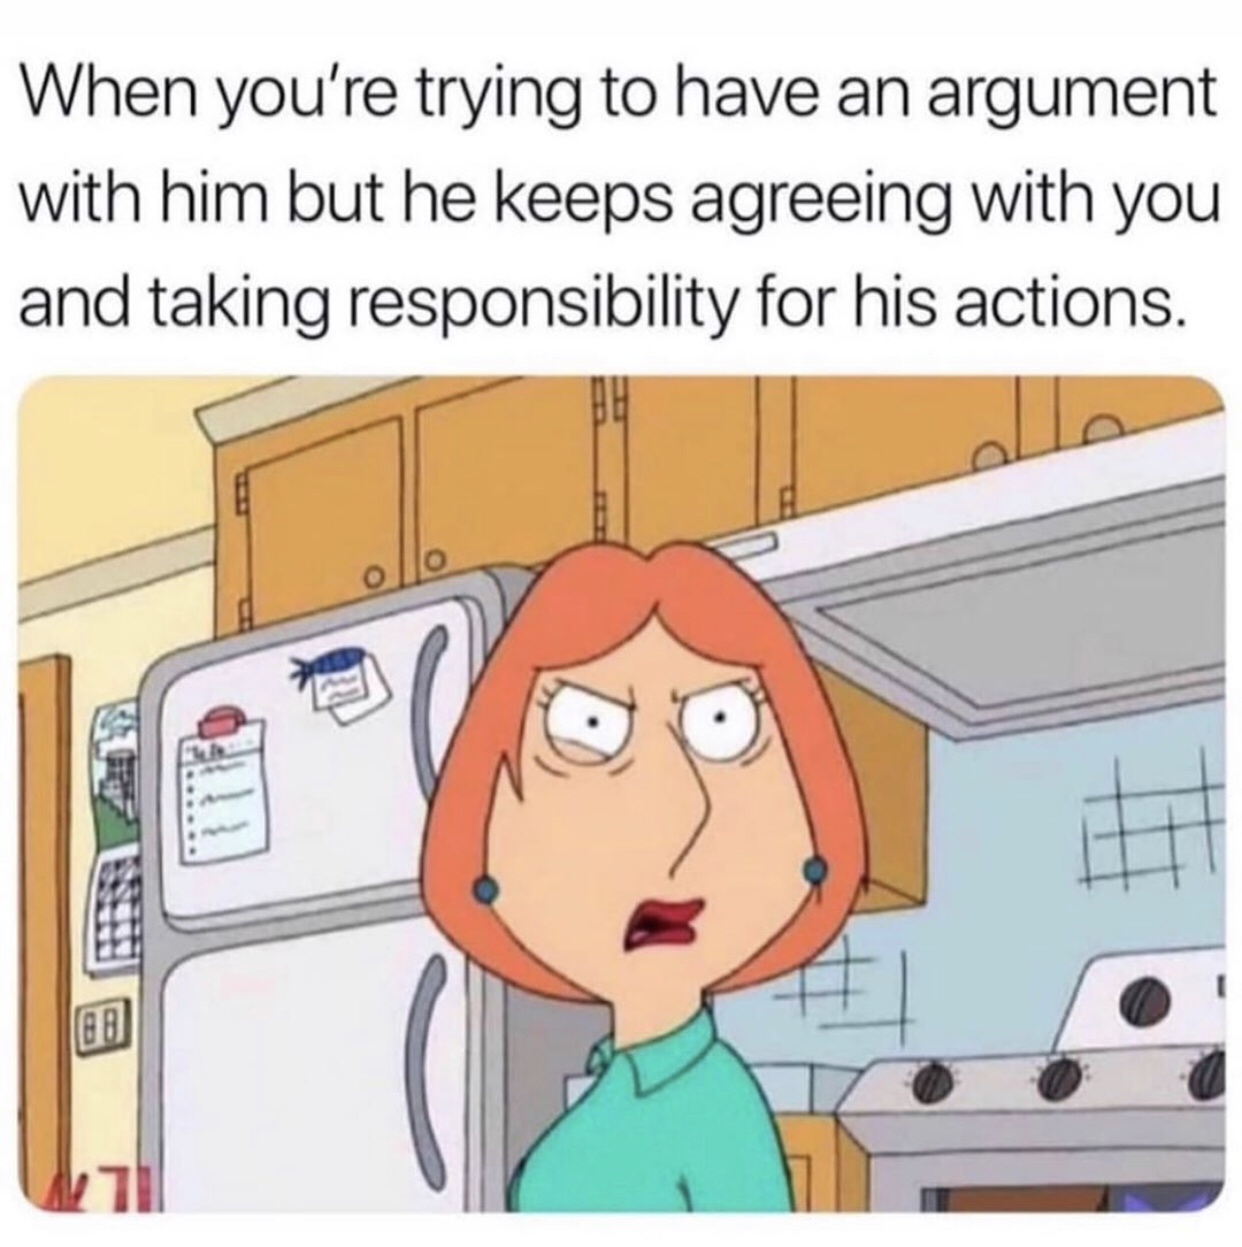 you re trying to argue with him - When you're trying to have an argument with him but he keeps agreeing with you and taking responsibility for his actions.